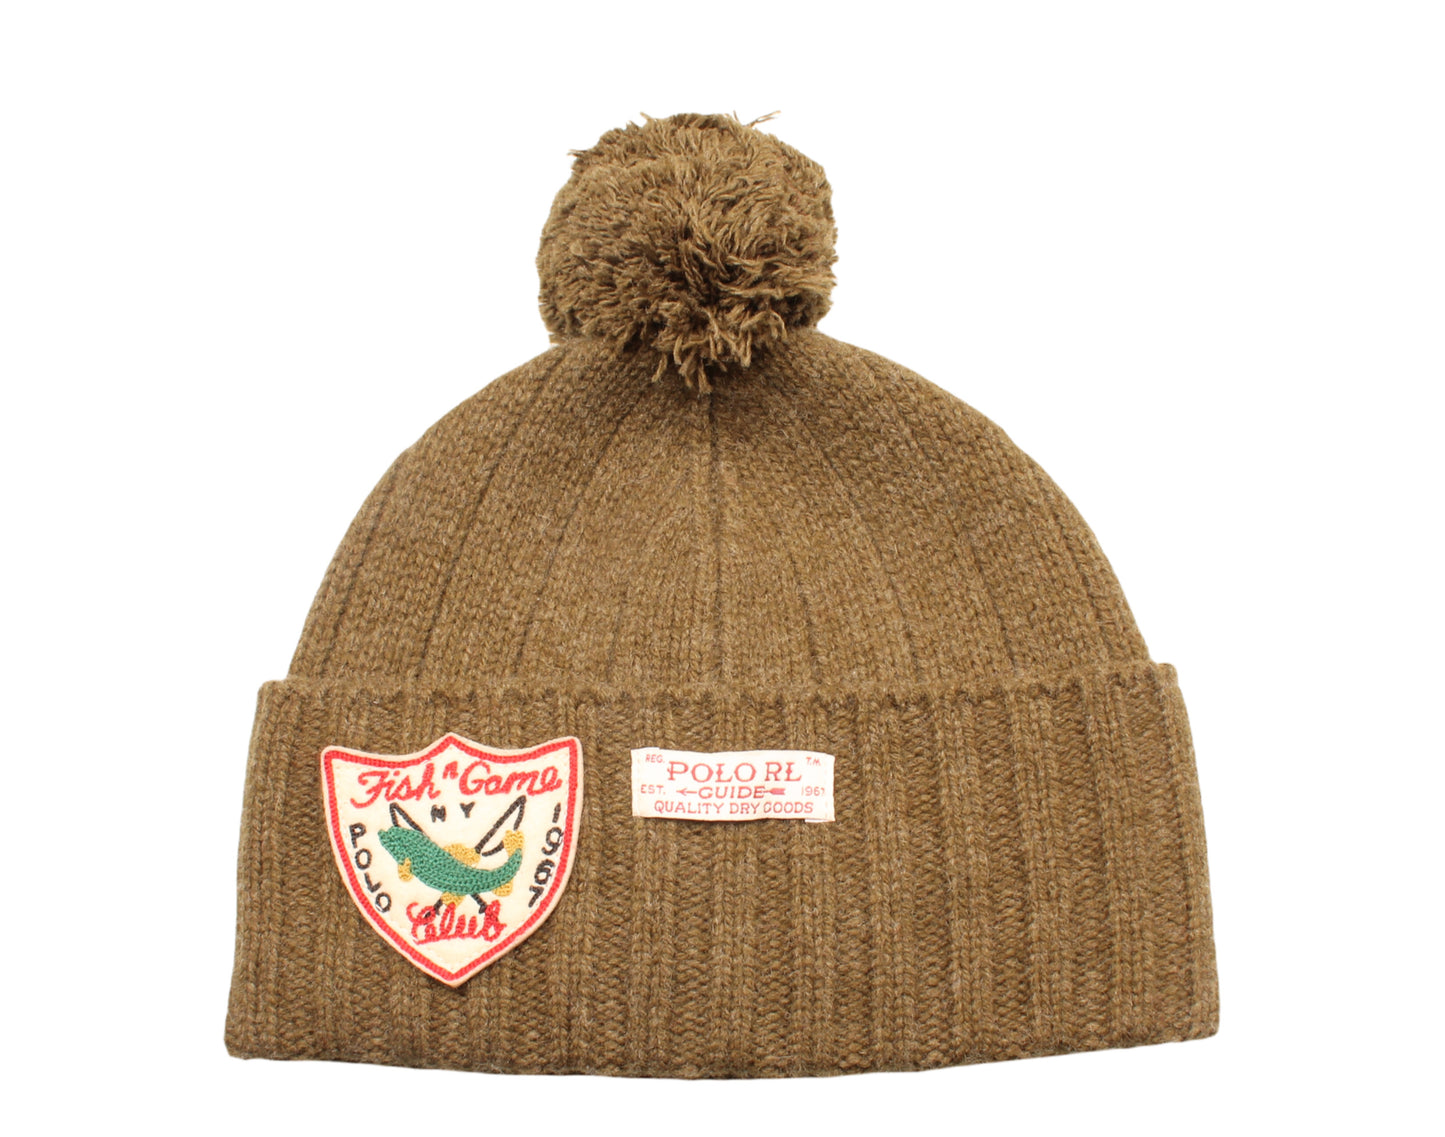 Polo Ralph Lauren Wool Expedition Pom-Pom Cuff Knit Hat